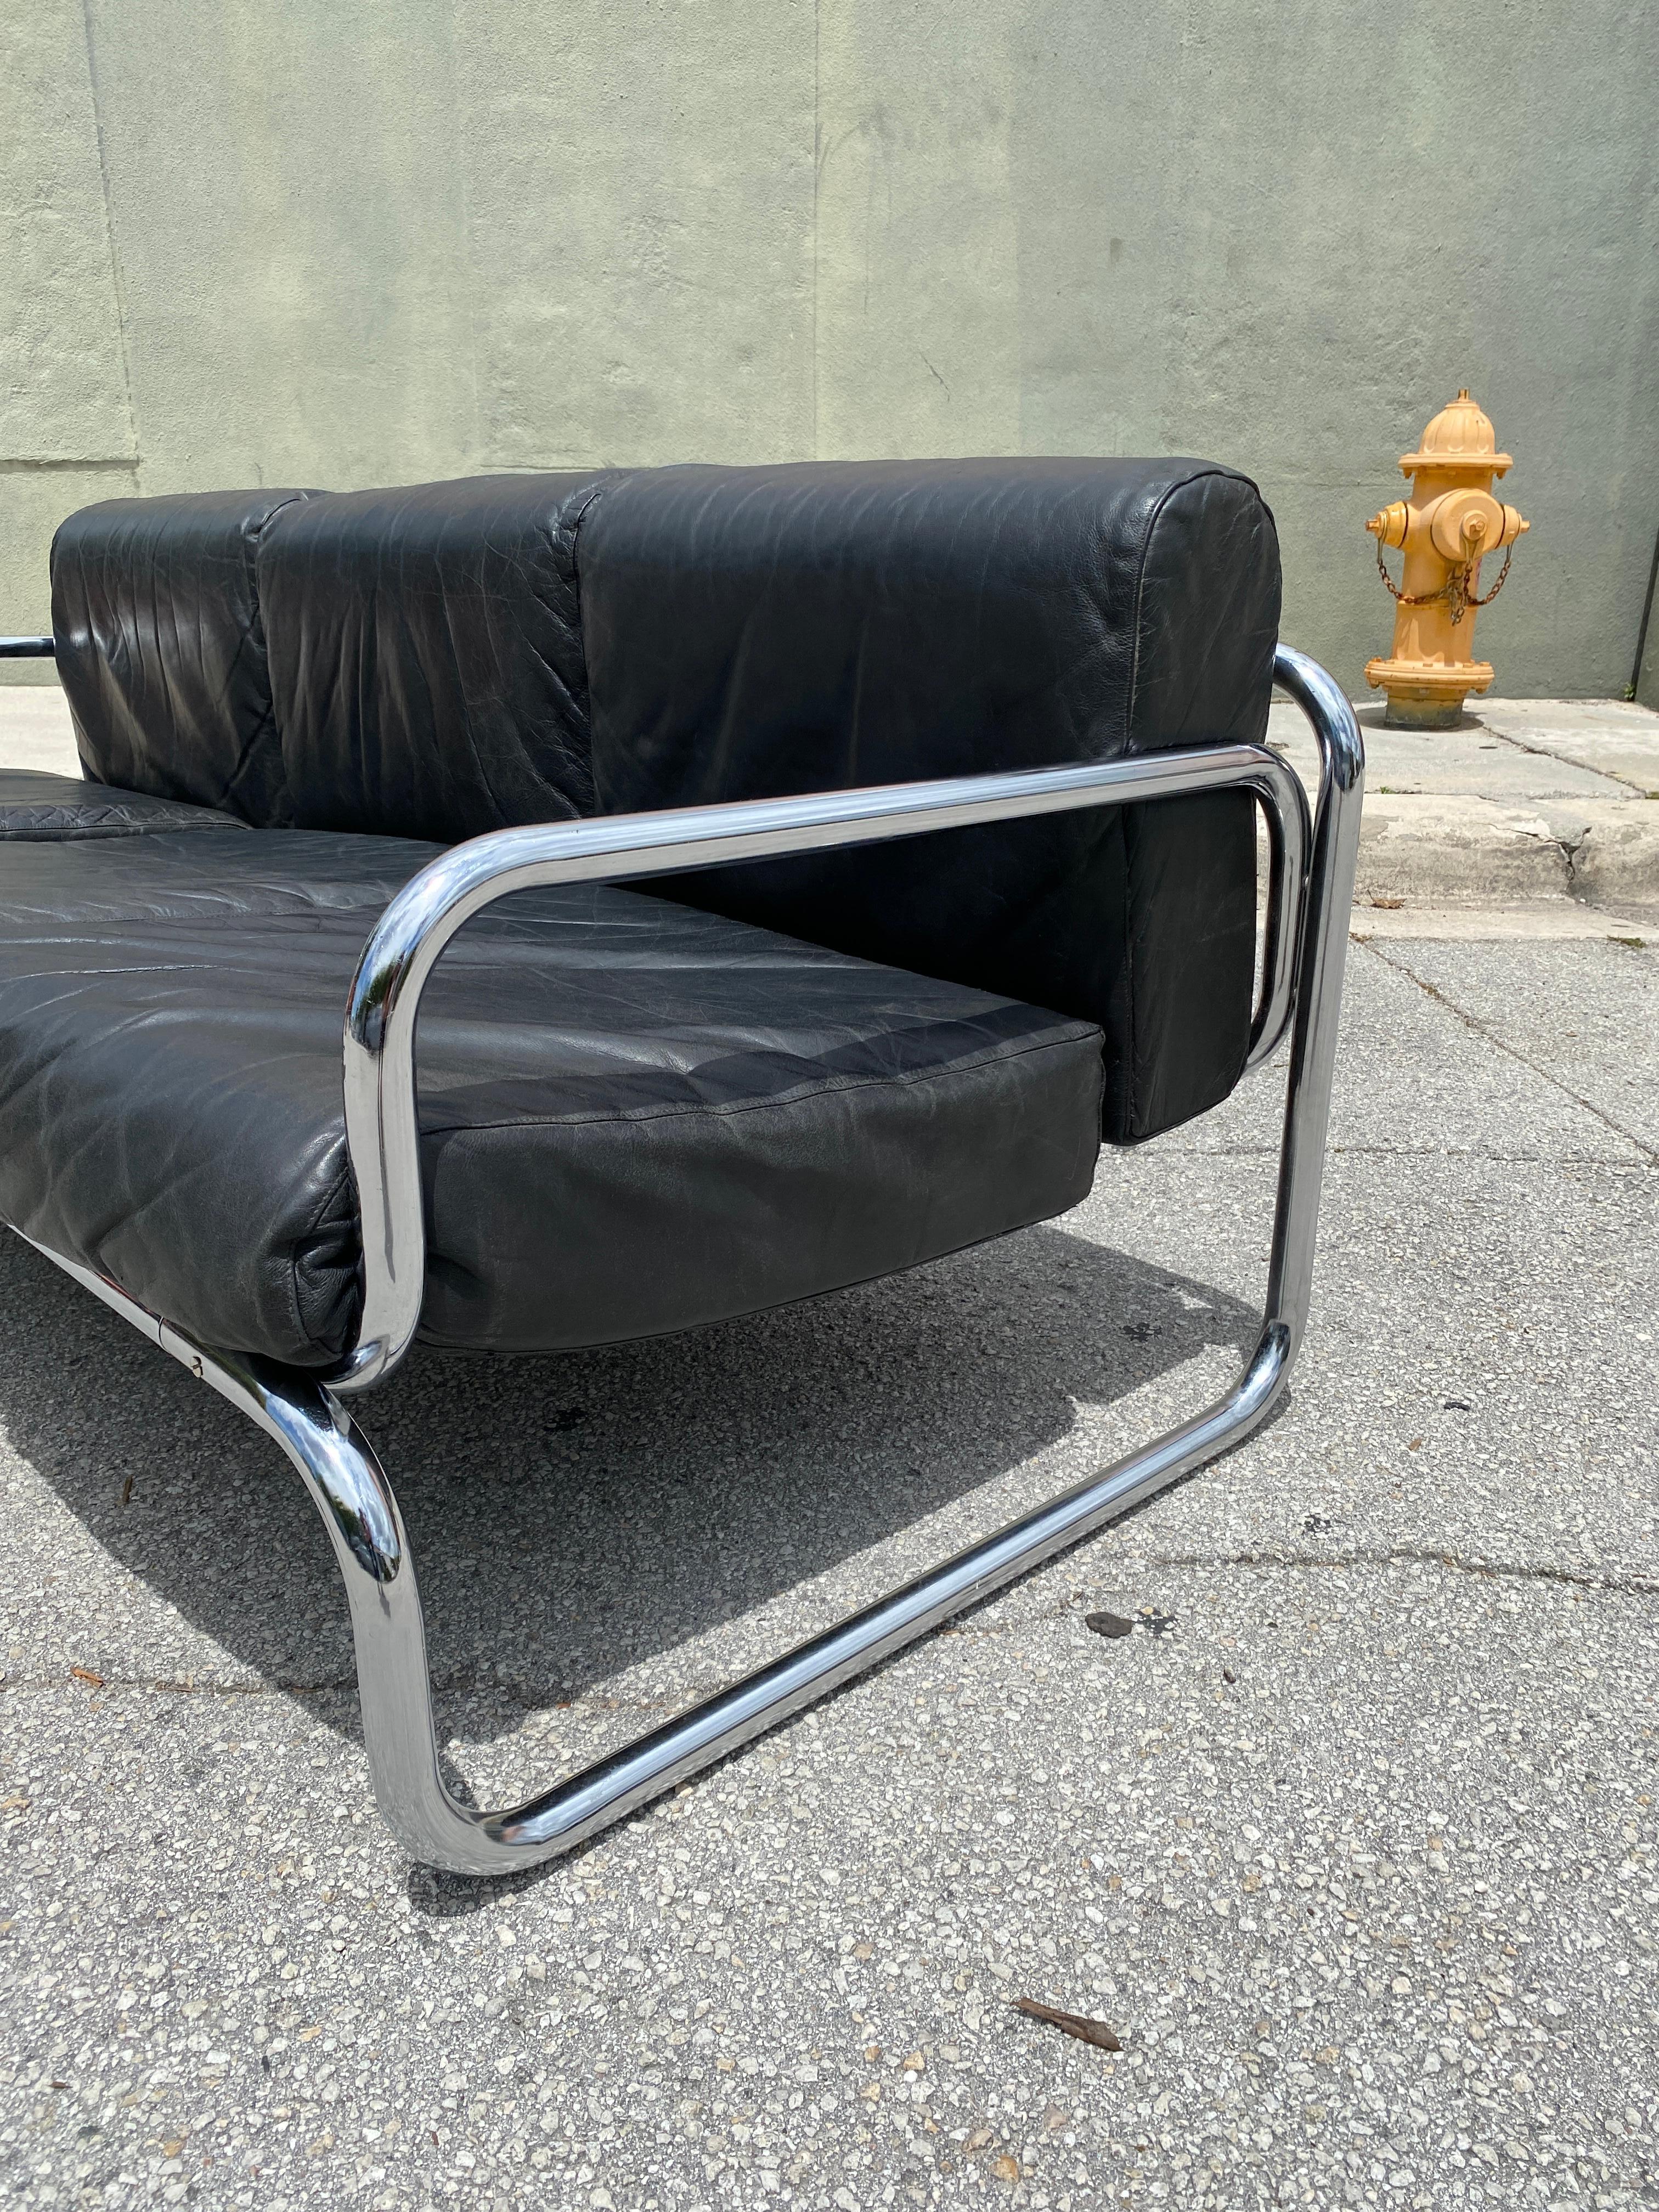 Mid century Rodney Kinsman ‘T Range’ three seater sofa for OMK with black hide seat cushions and chrome tubular frame. Circa 1960s.

Measures: 72.5